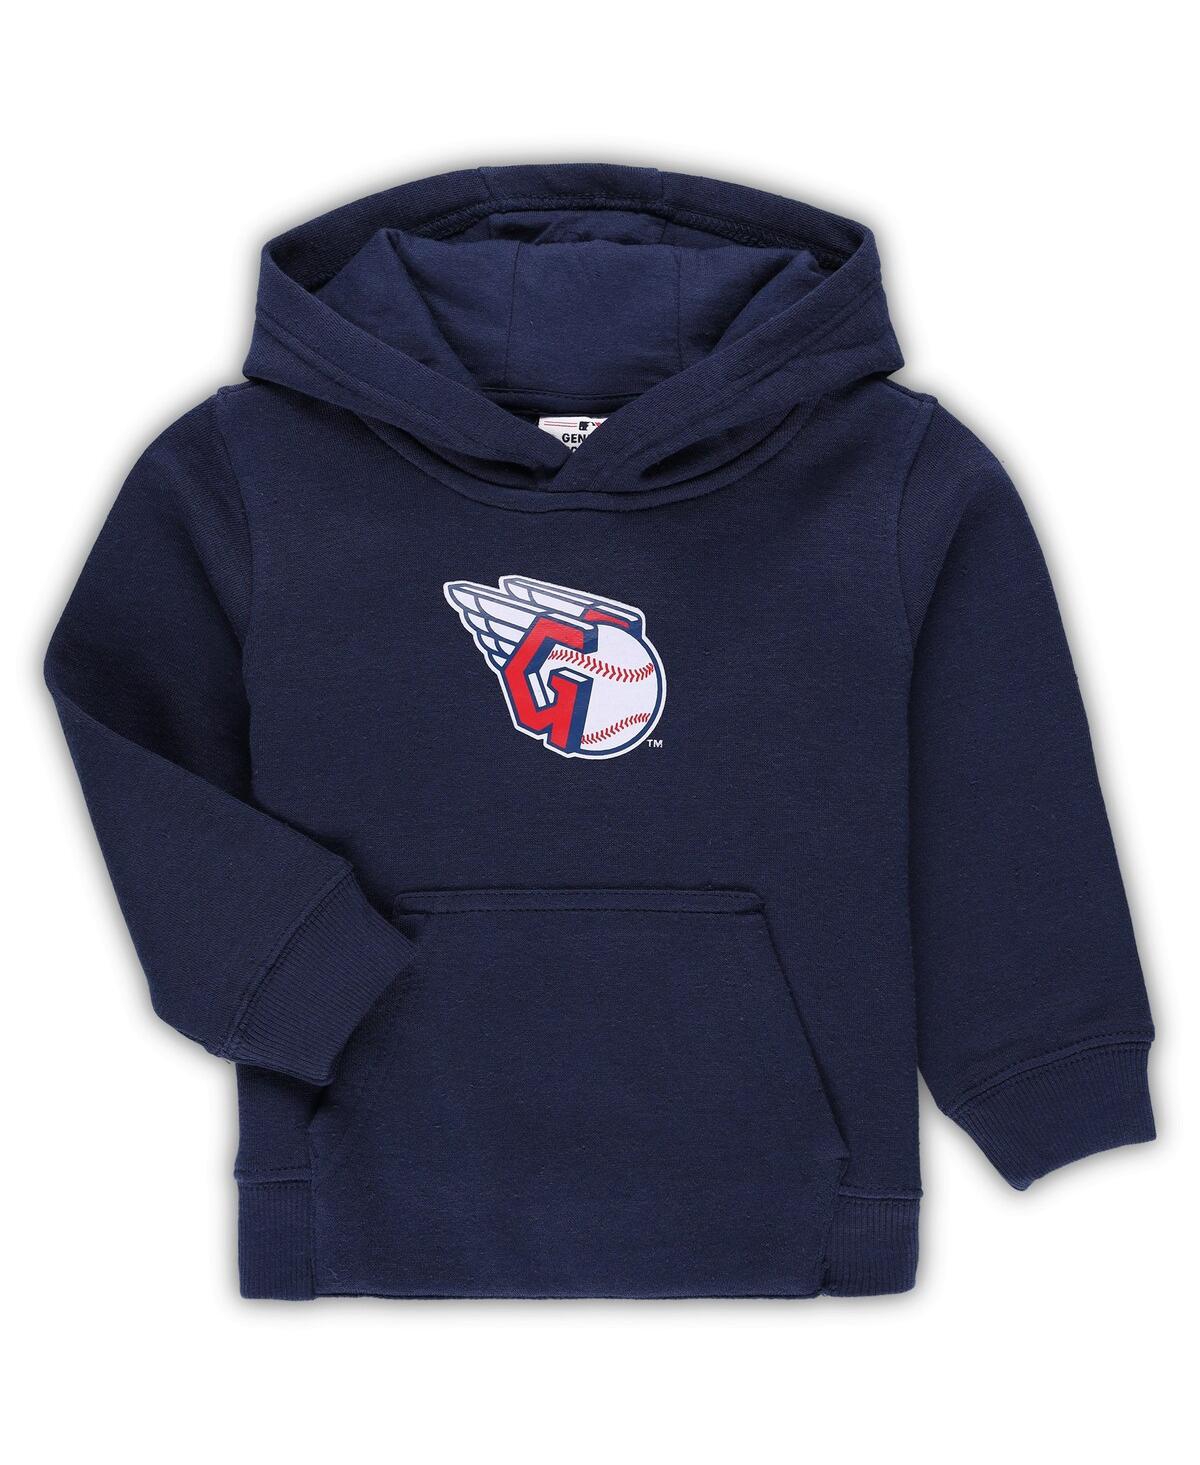 Outerstuff Babies' Toddler Boys And Girls Navy Cleveland Guardians Team Primary Logo Fleece Pullover Hoodie